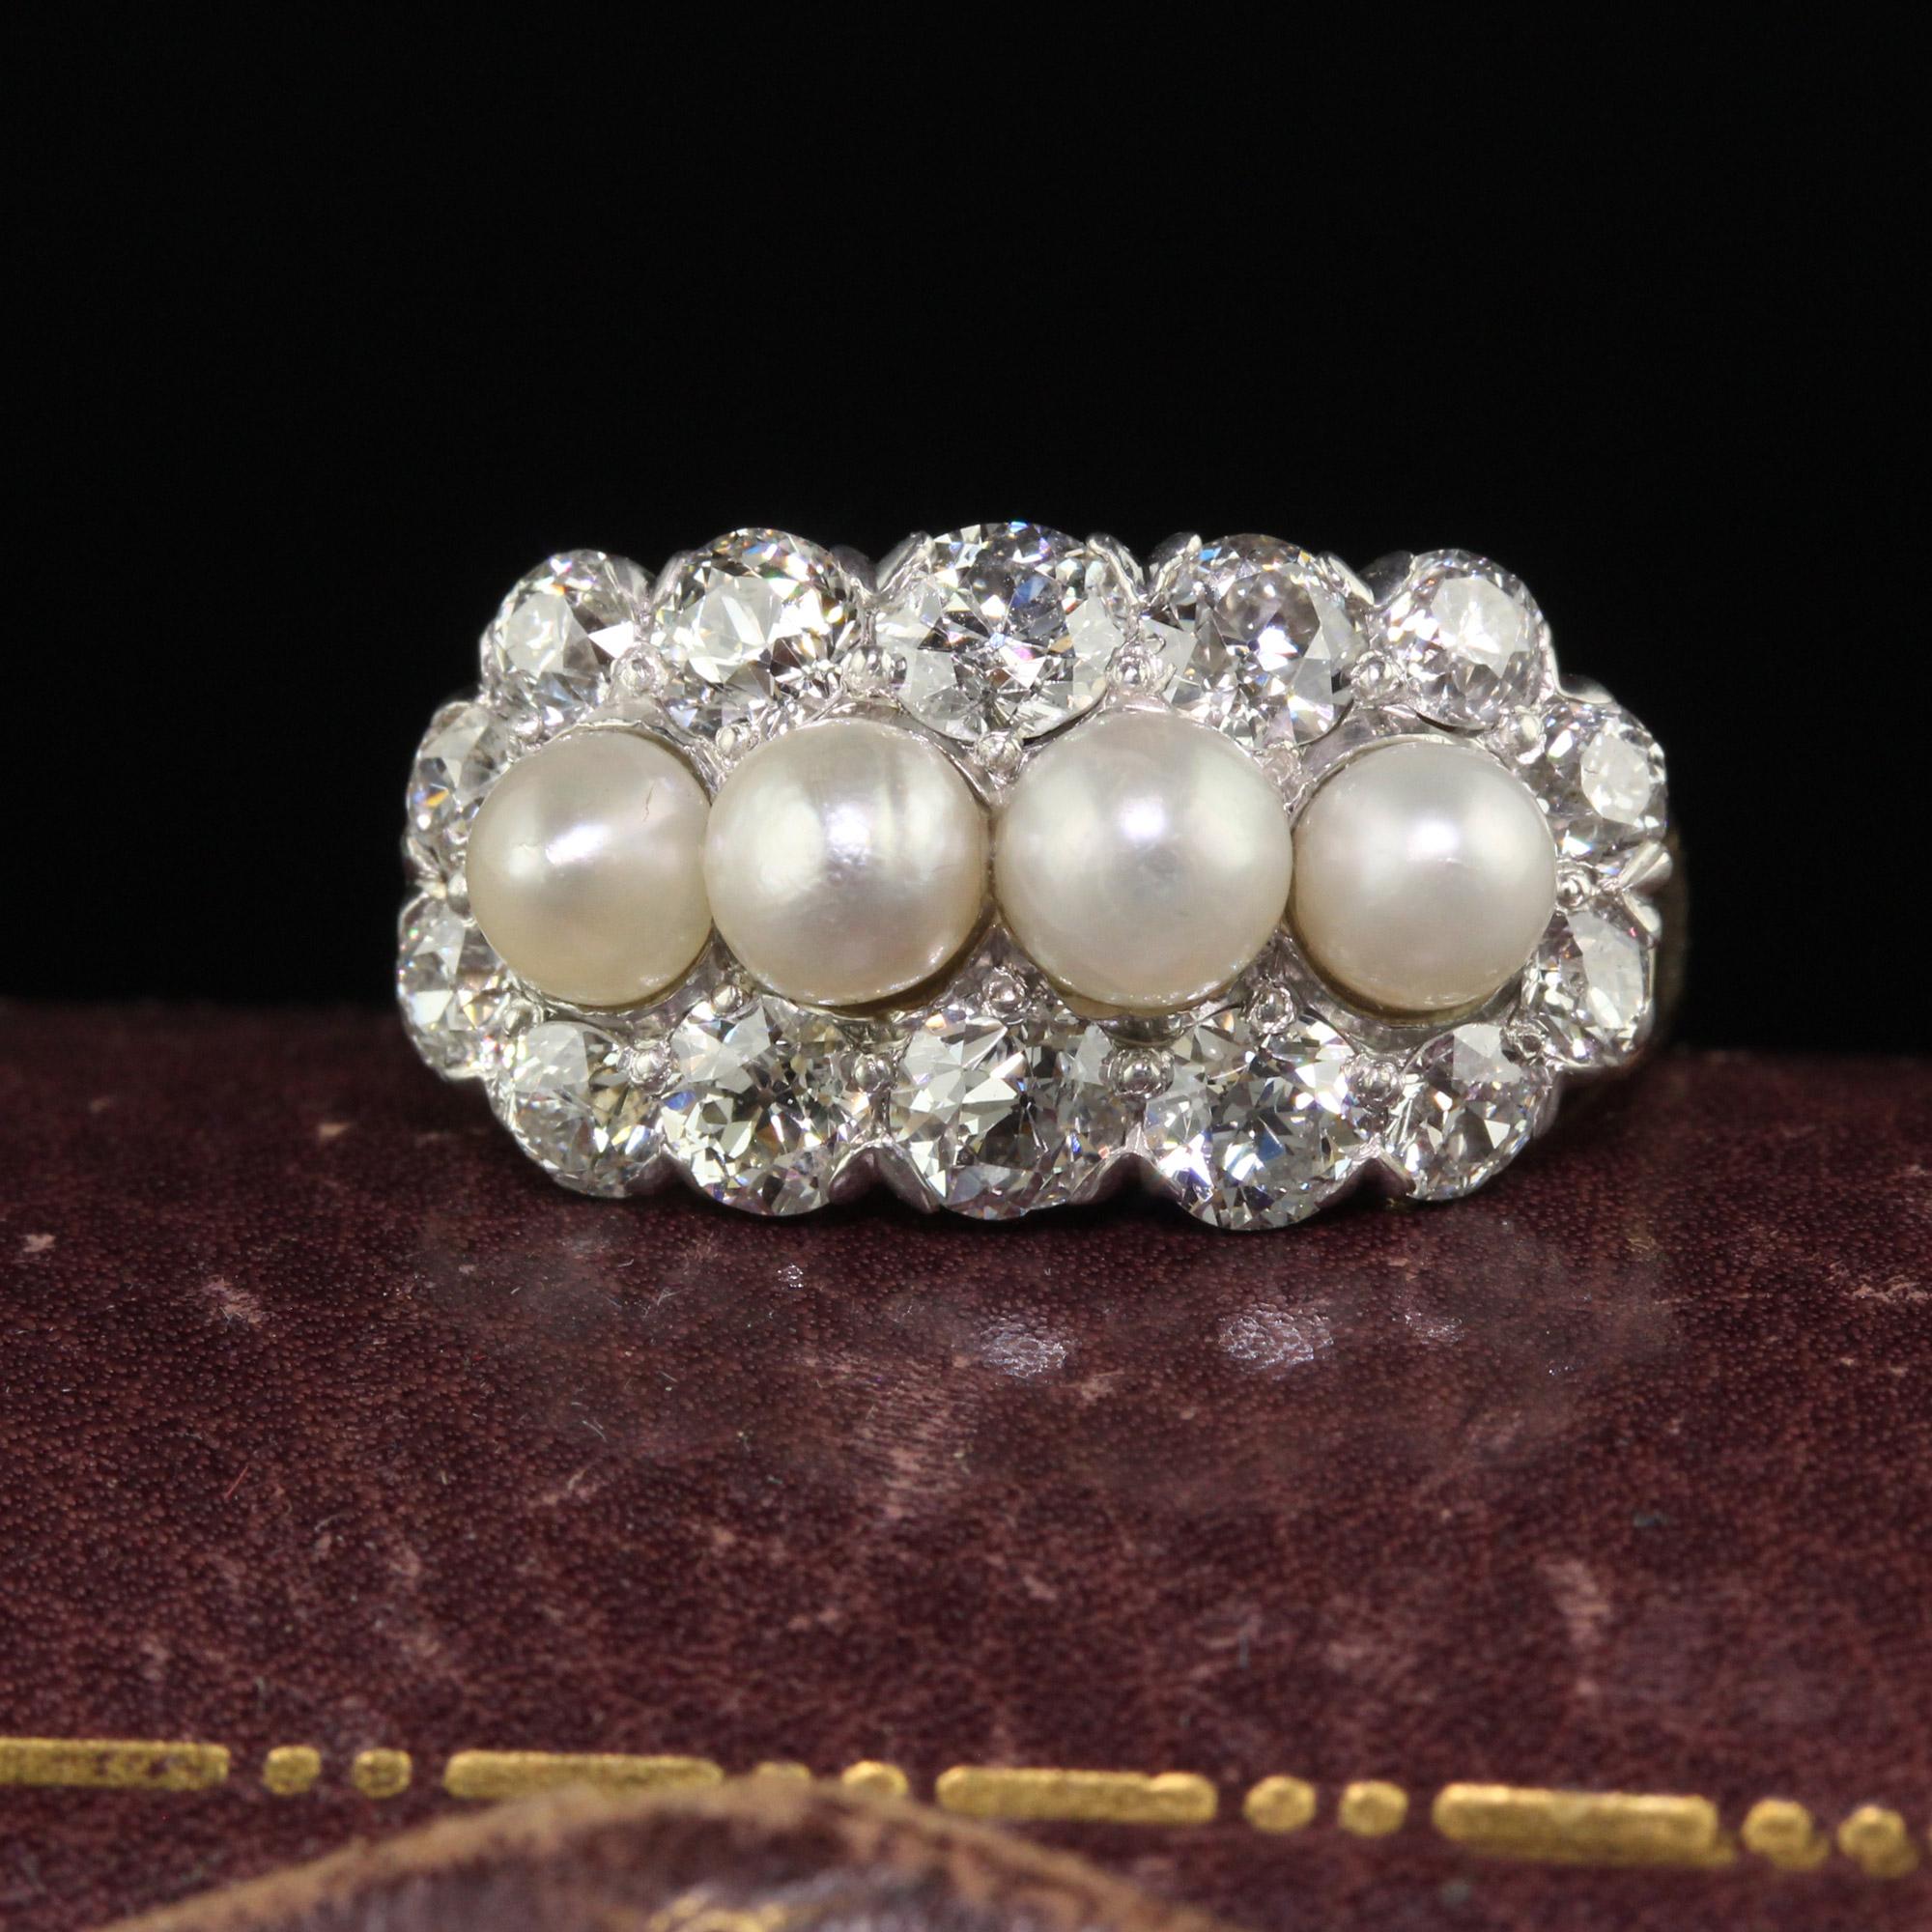 Beautiful Antique Art Deco 14K Gold and Platinum Old Euro Diamond and Pearl Cocktail Ring. This gorgeous antique cocktail ring is crafted in 14k yellow gold and platinum. The center row has natural pearls and is surrounded by a row of beautiful old